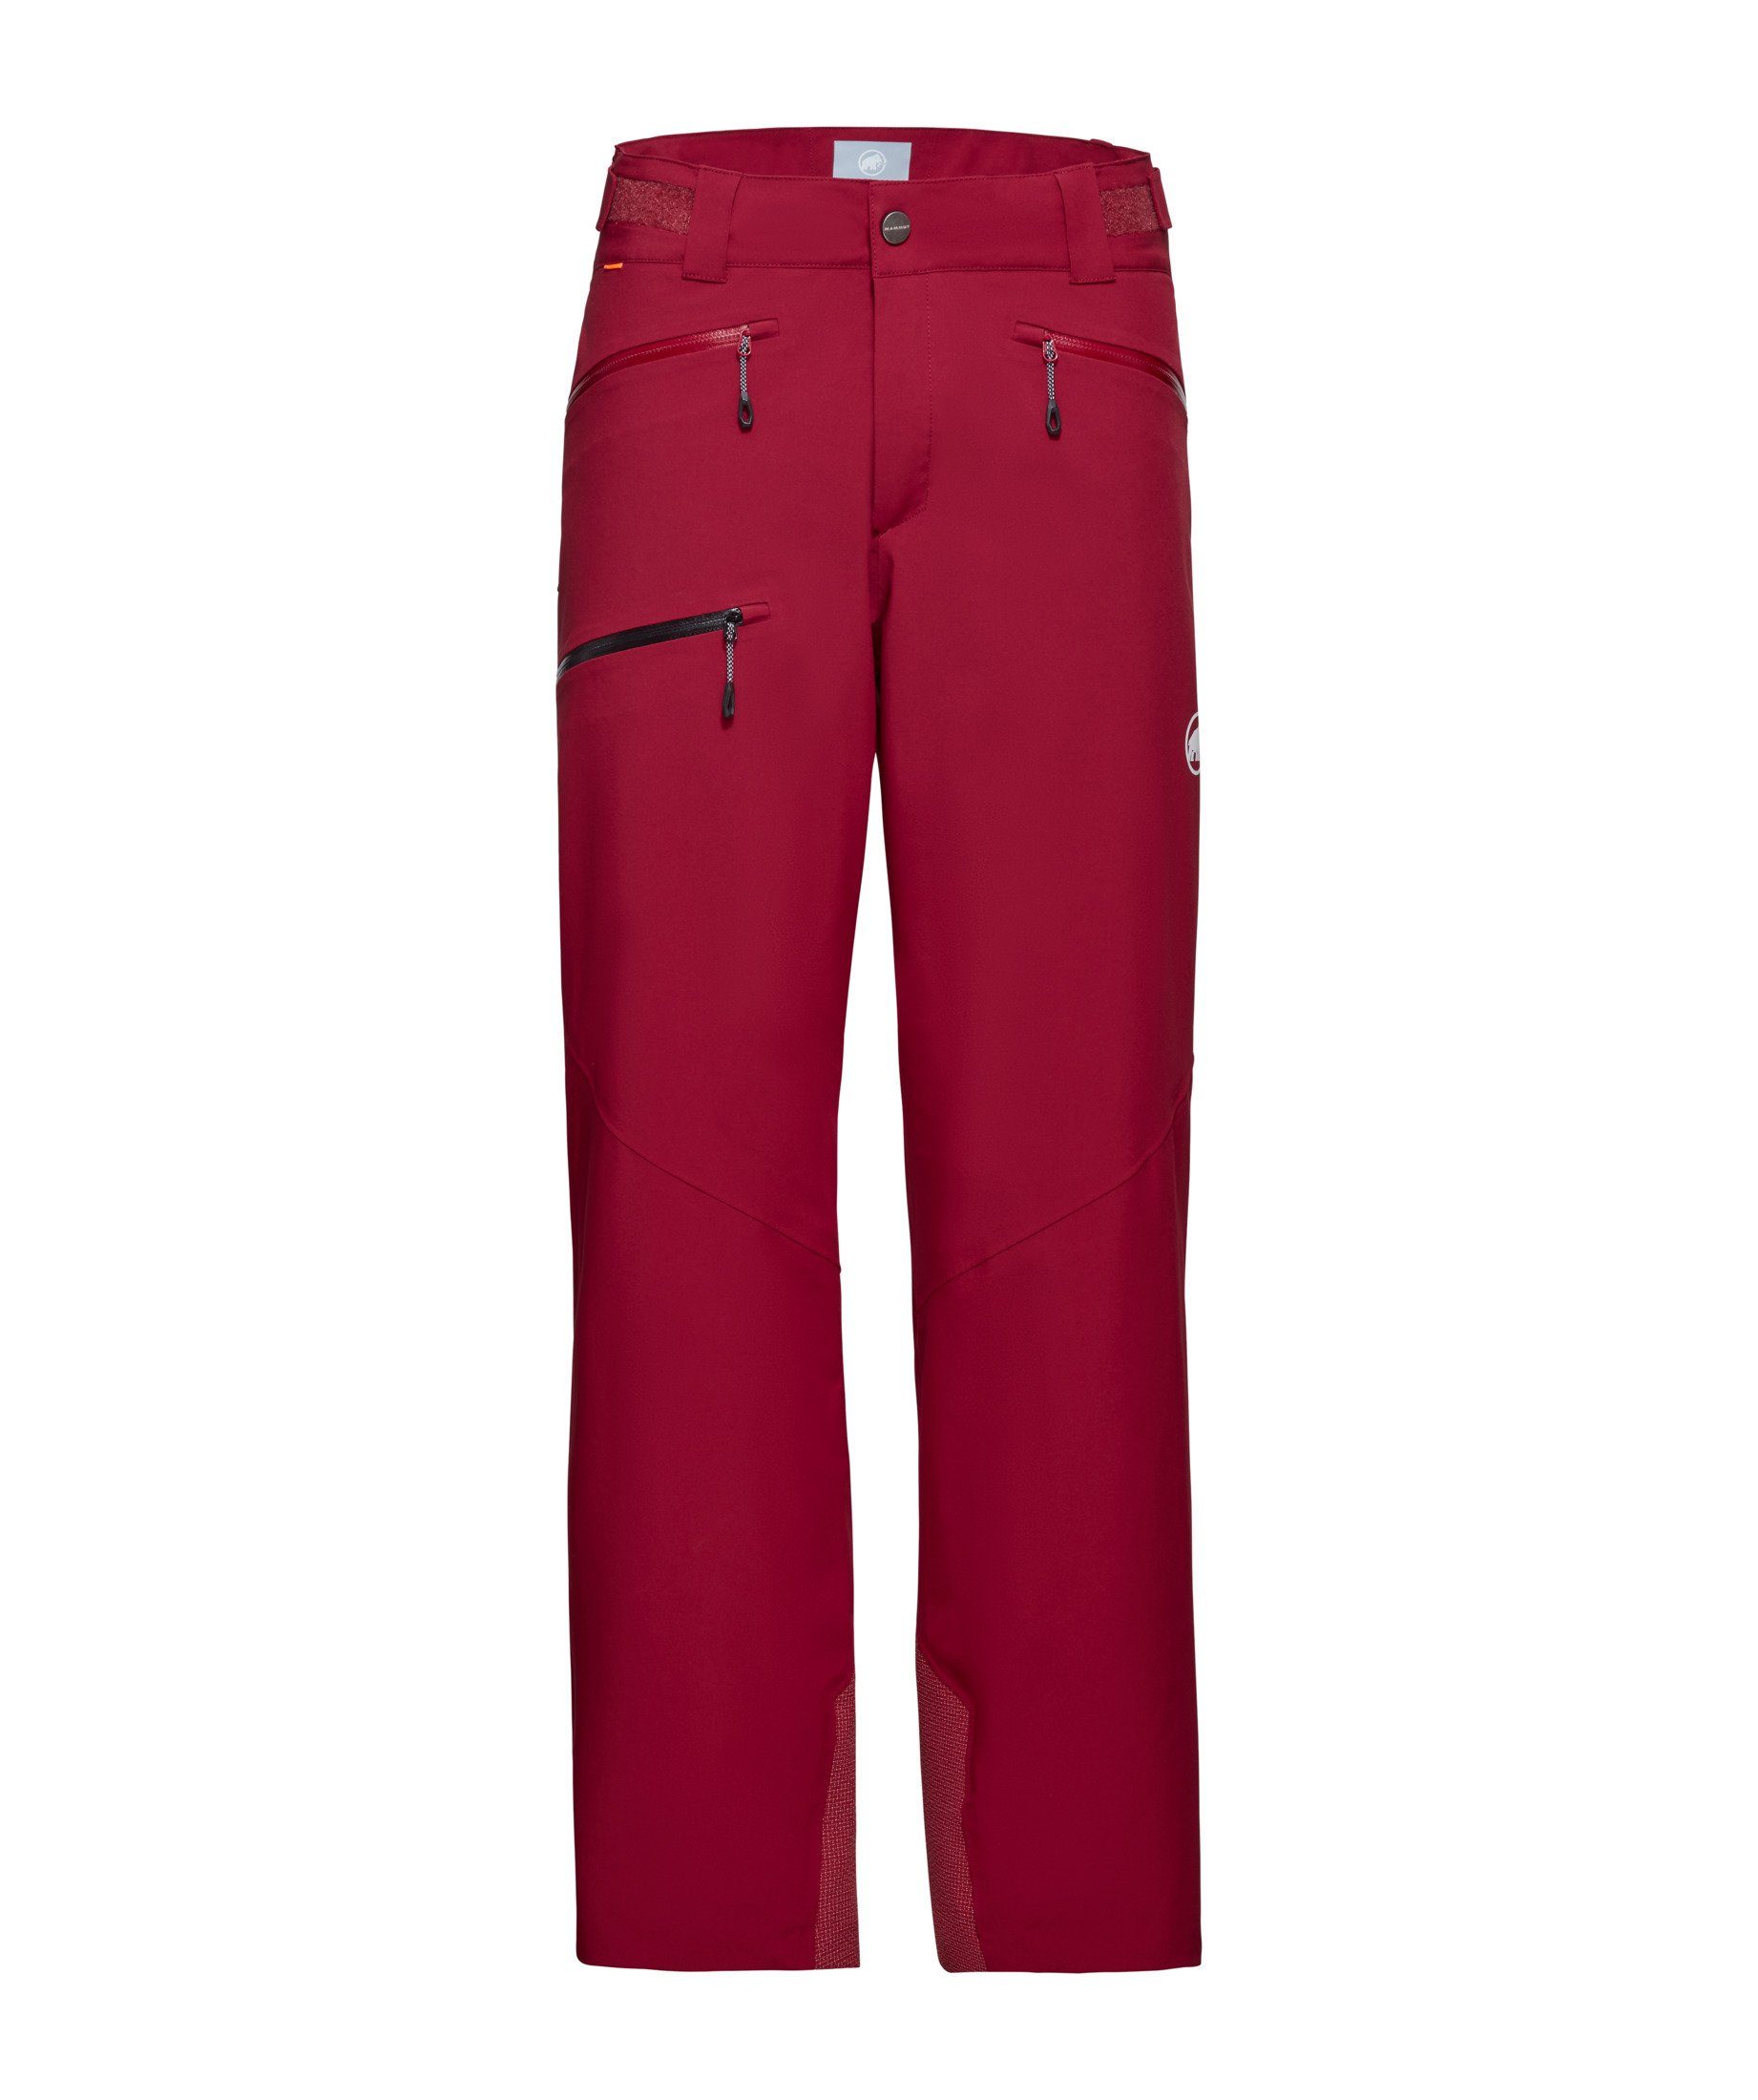 Stoney HS Pants red Men Skihose blood Thermo Mammut